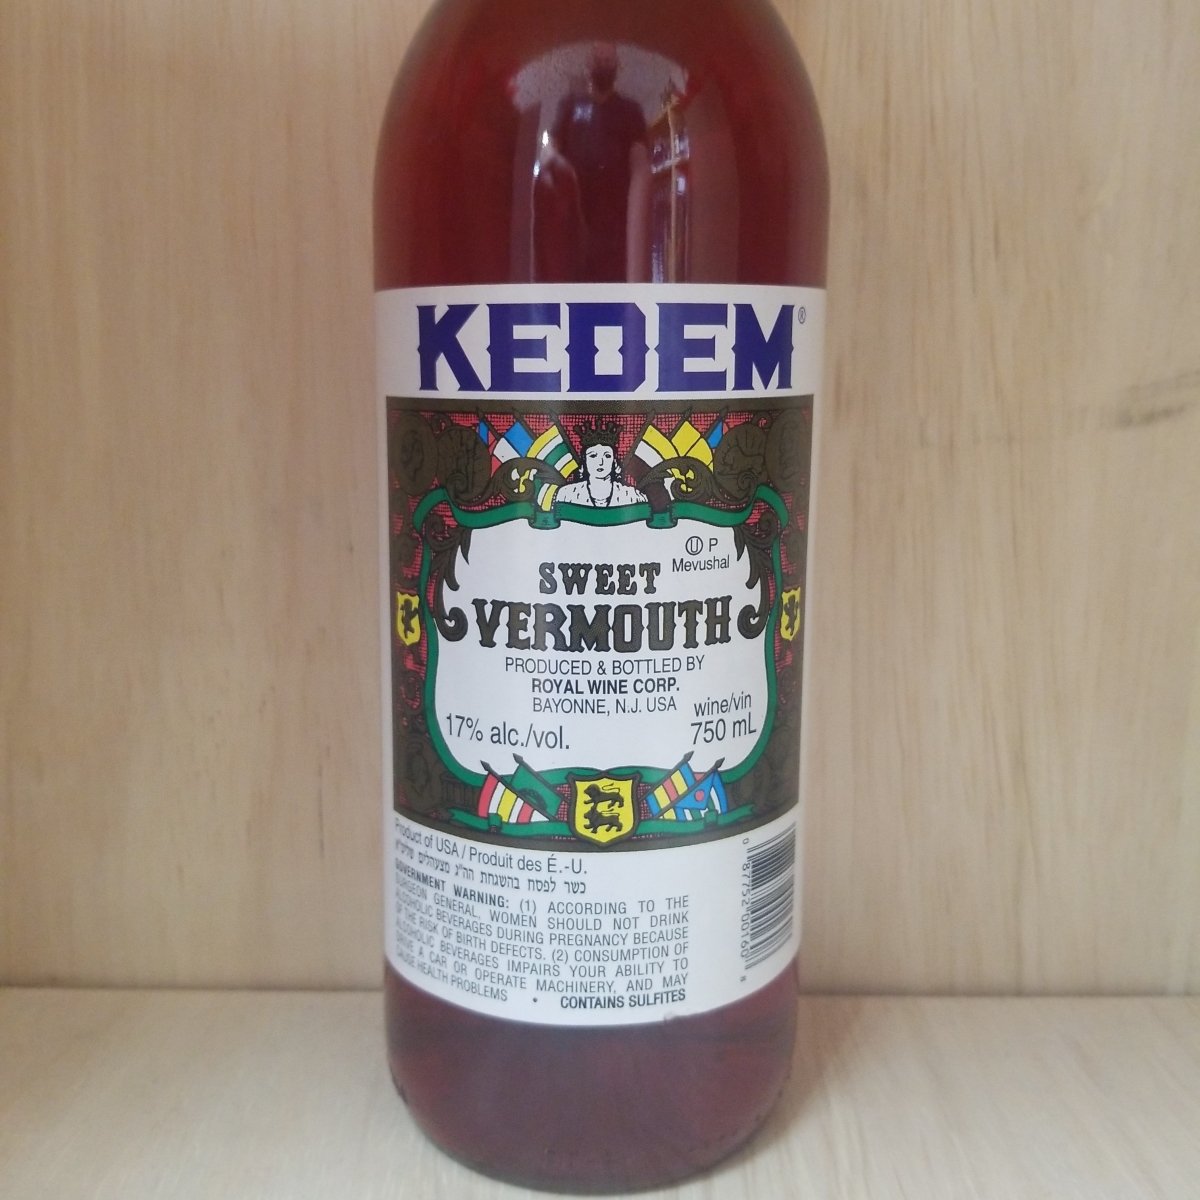 Kedem Sweet Vermouth 750ml (Kosher for Passover/Mevushal) - Sip & Say